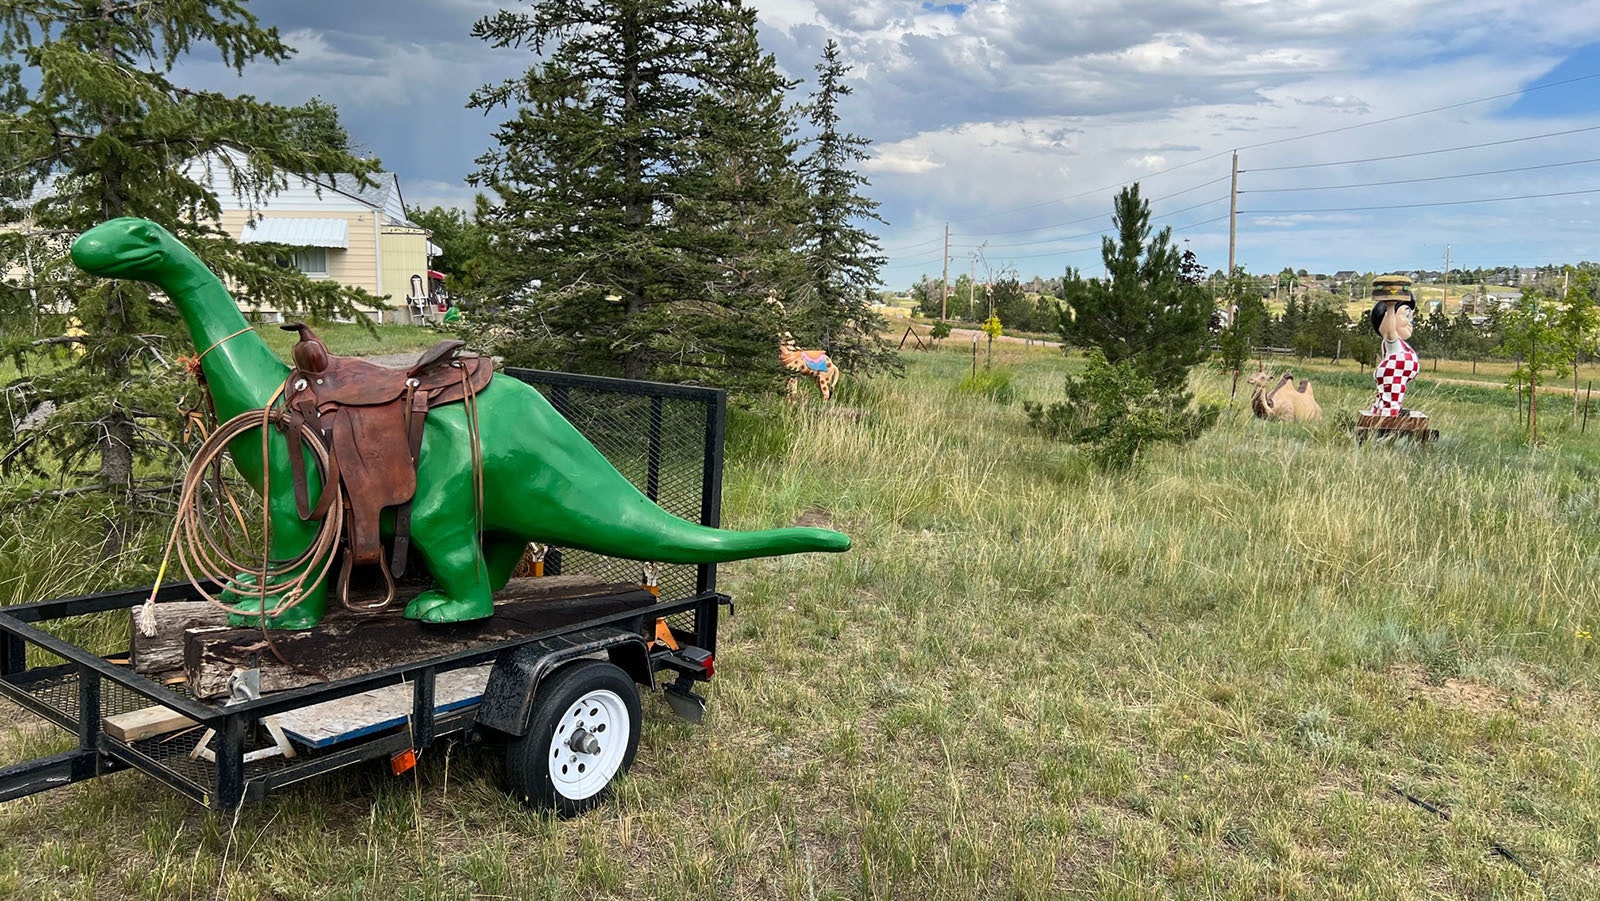 A truly Wyomingized Sinclair dinosaur, with a giraffe, camel and Big Boy in the background.